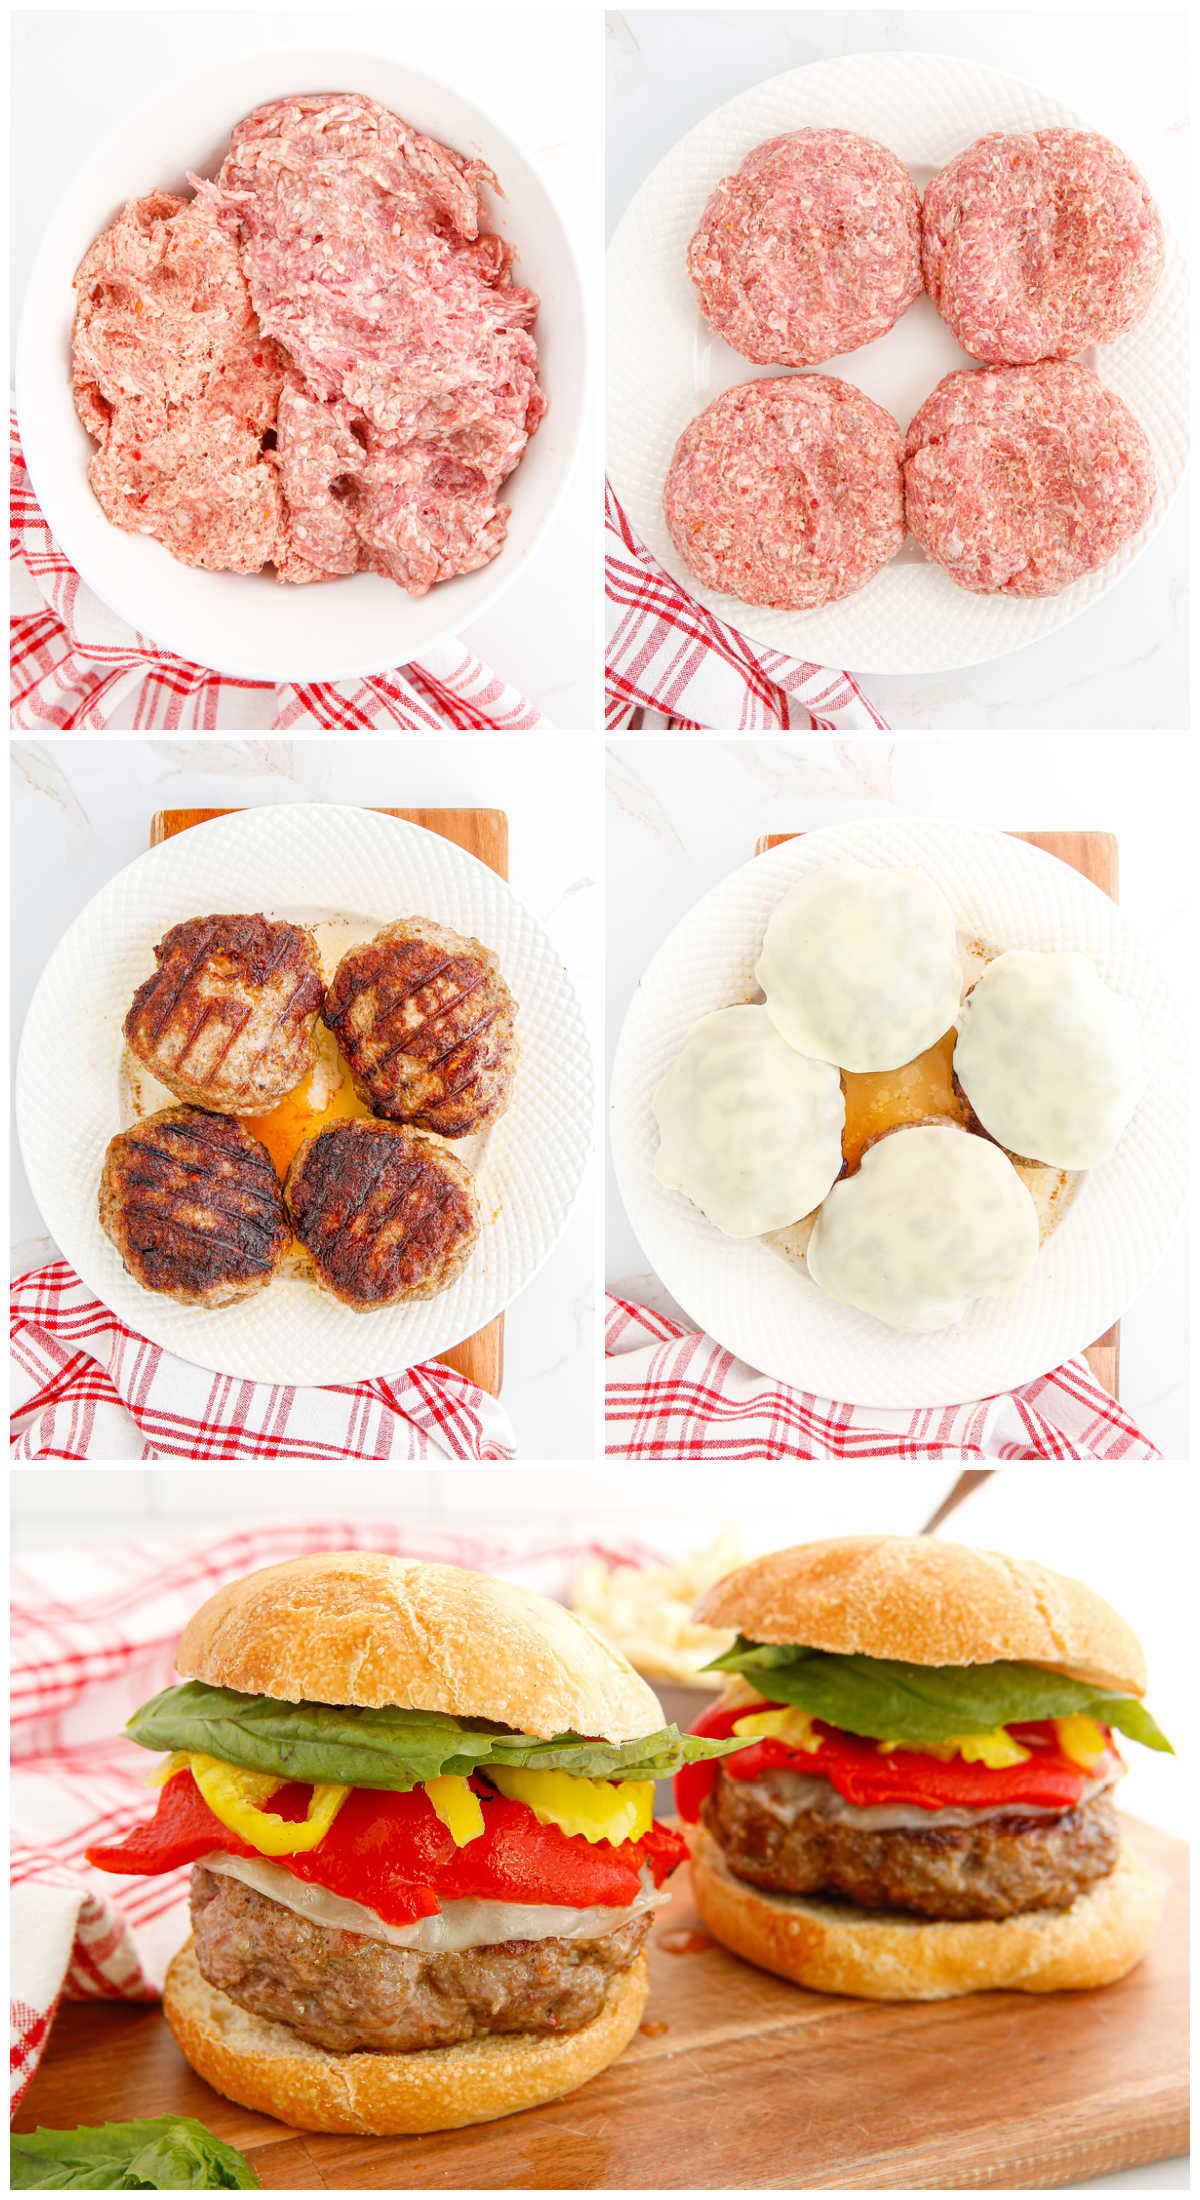 A picture collage showing how to make this Italian Sausage Burgers recipe.